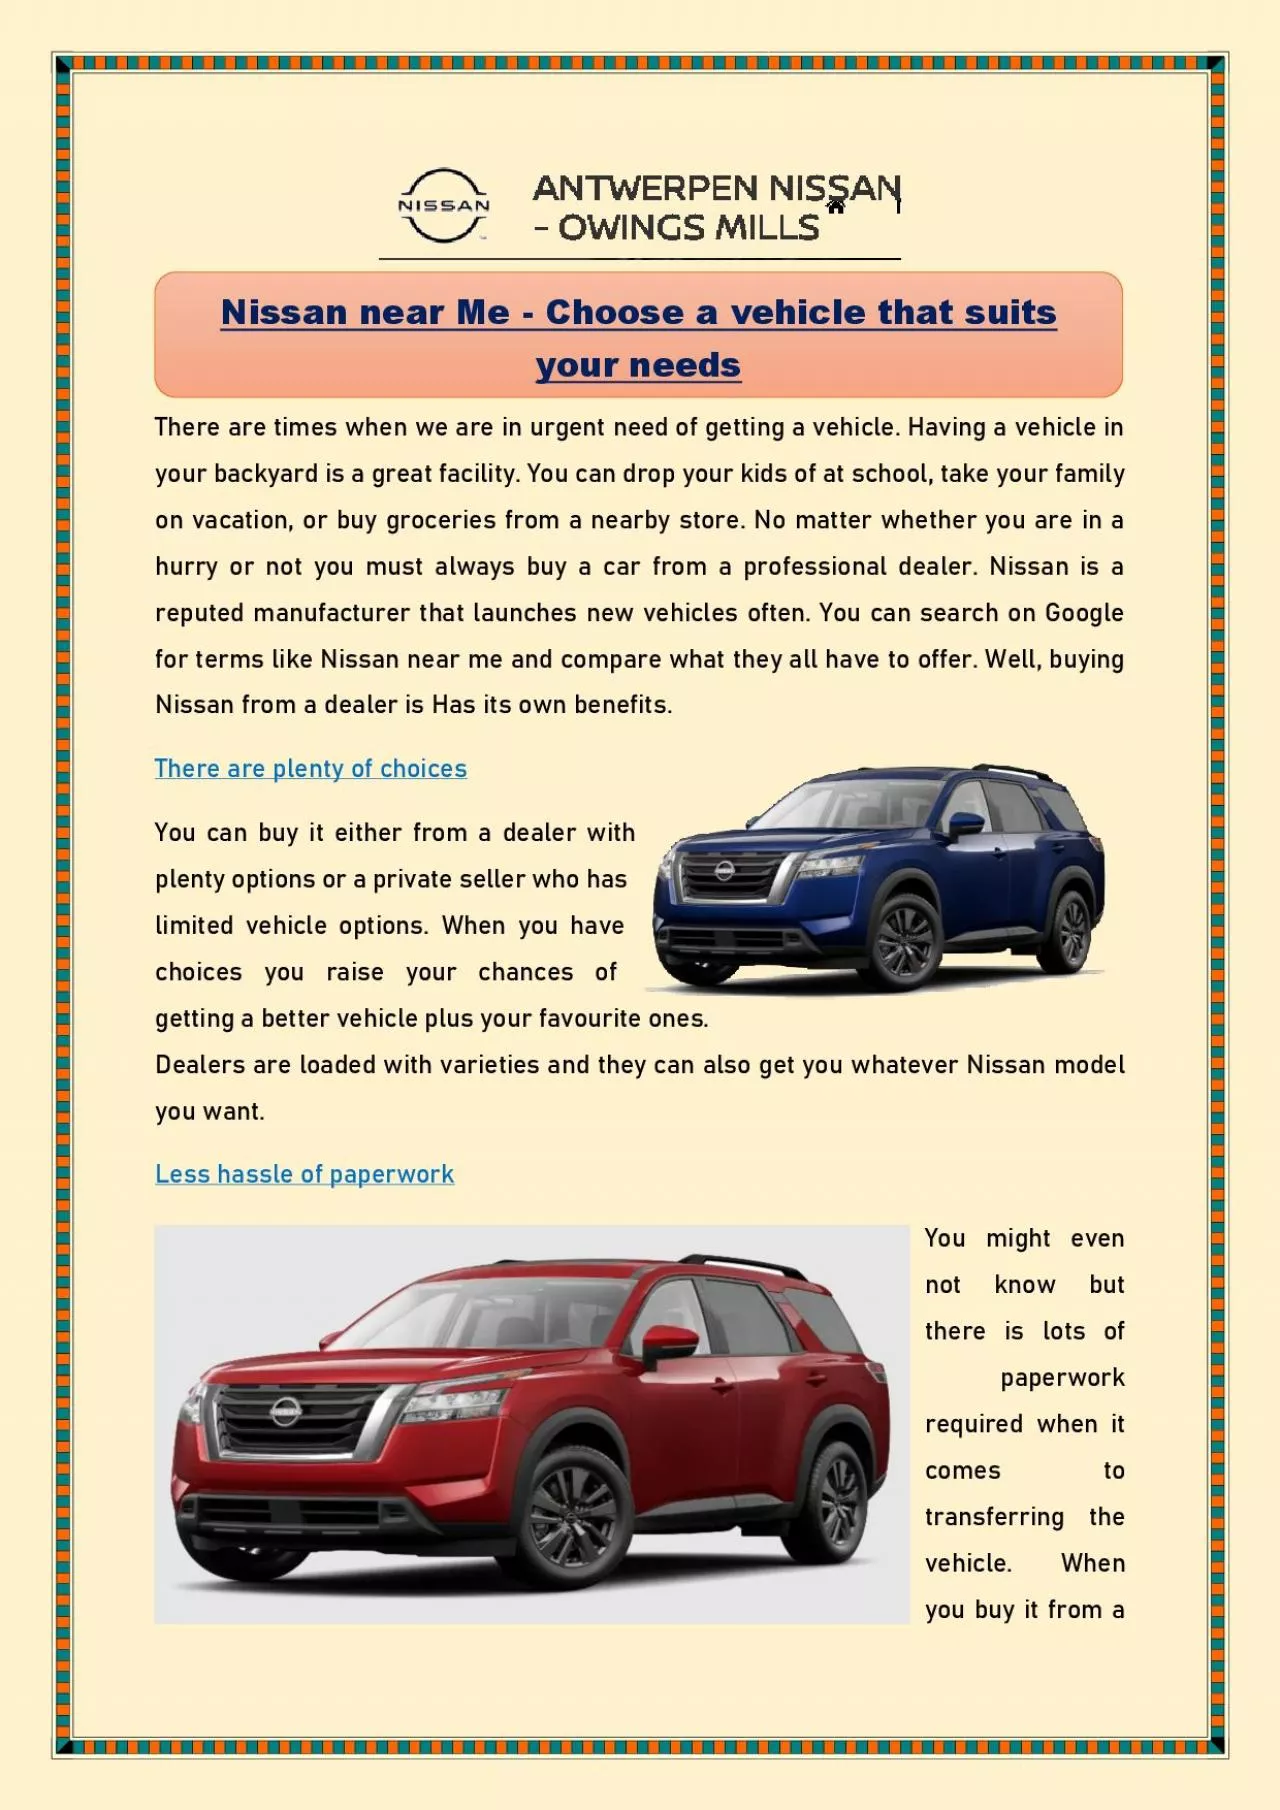 Nissan near Me - Choose a vehicle that suits your needs